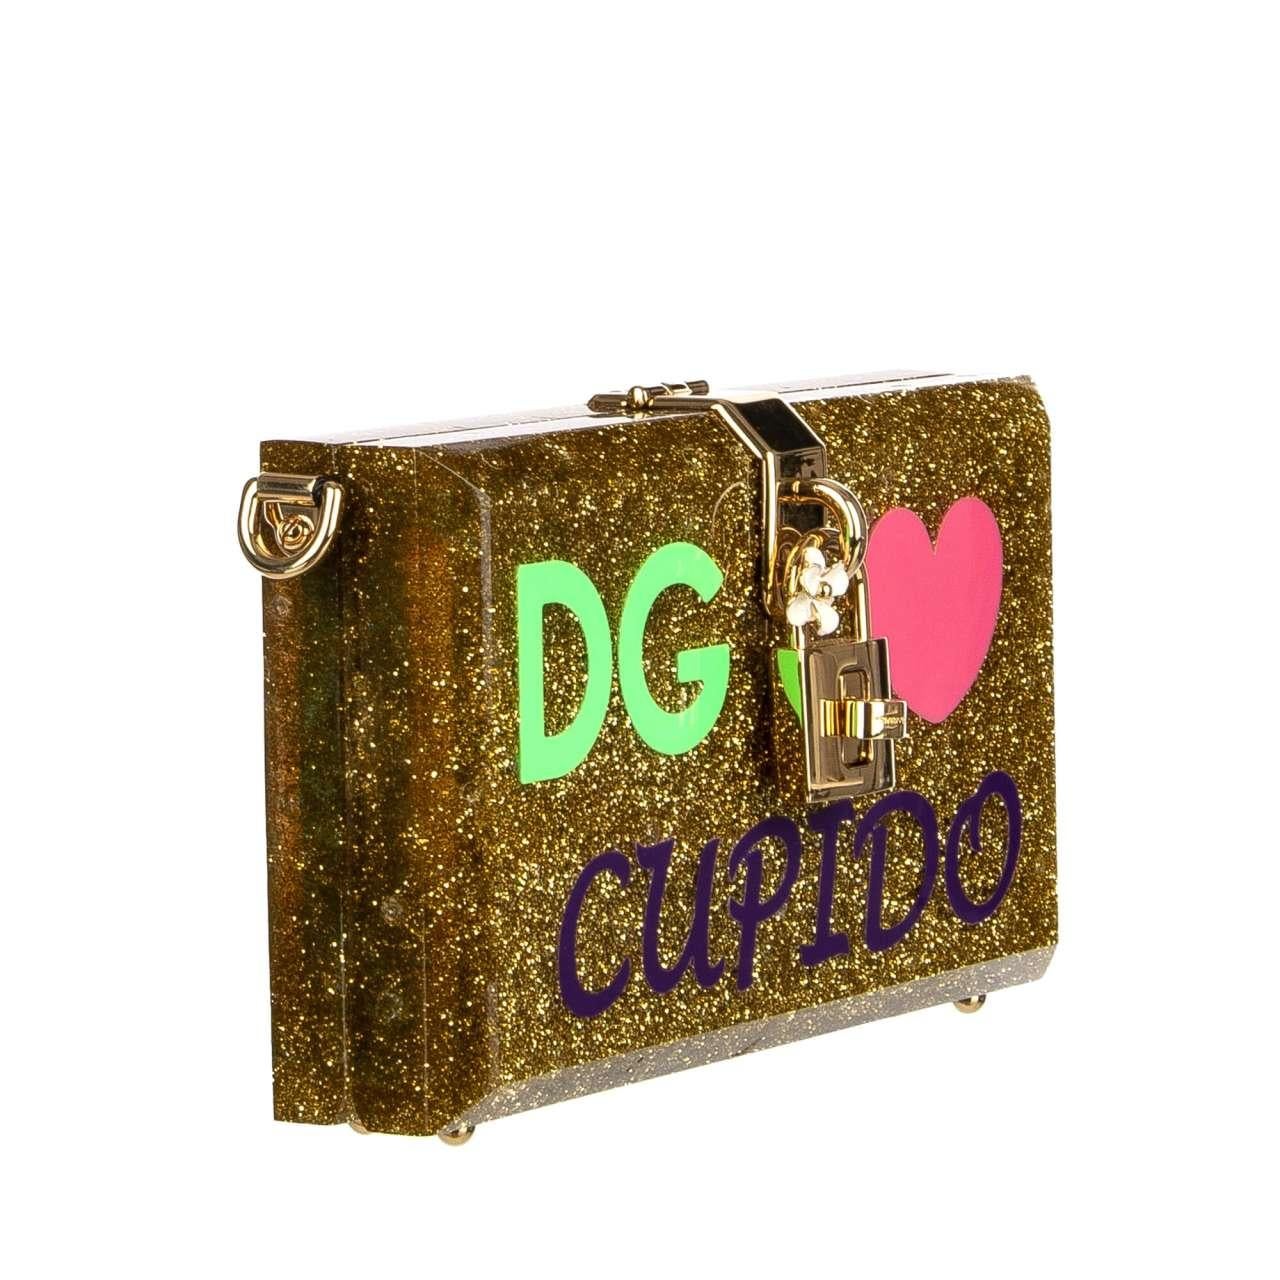 - Glitter Plexiglas shoulder bag / clutch DOLCE BOX with multicolor DG Cupido lettering, chain strap and decorative padlock with flower by DOLCE & GABBANA - New with Tag, Dustbag, Authenticity Card - Material: 99% Plexiglas, 1% Magnet - Former RRP: